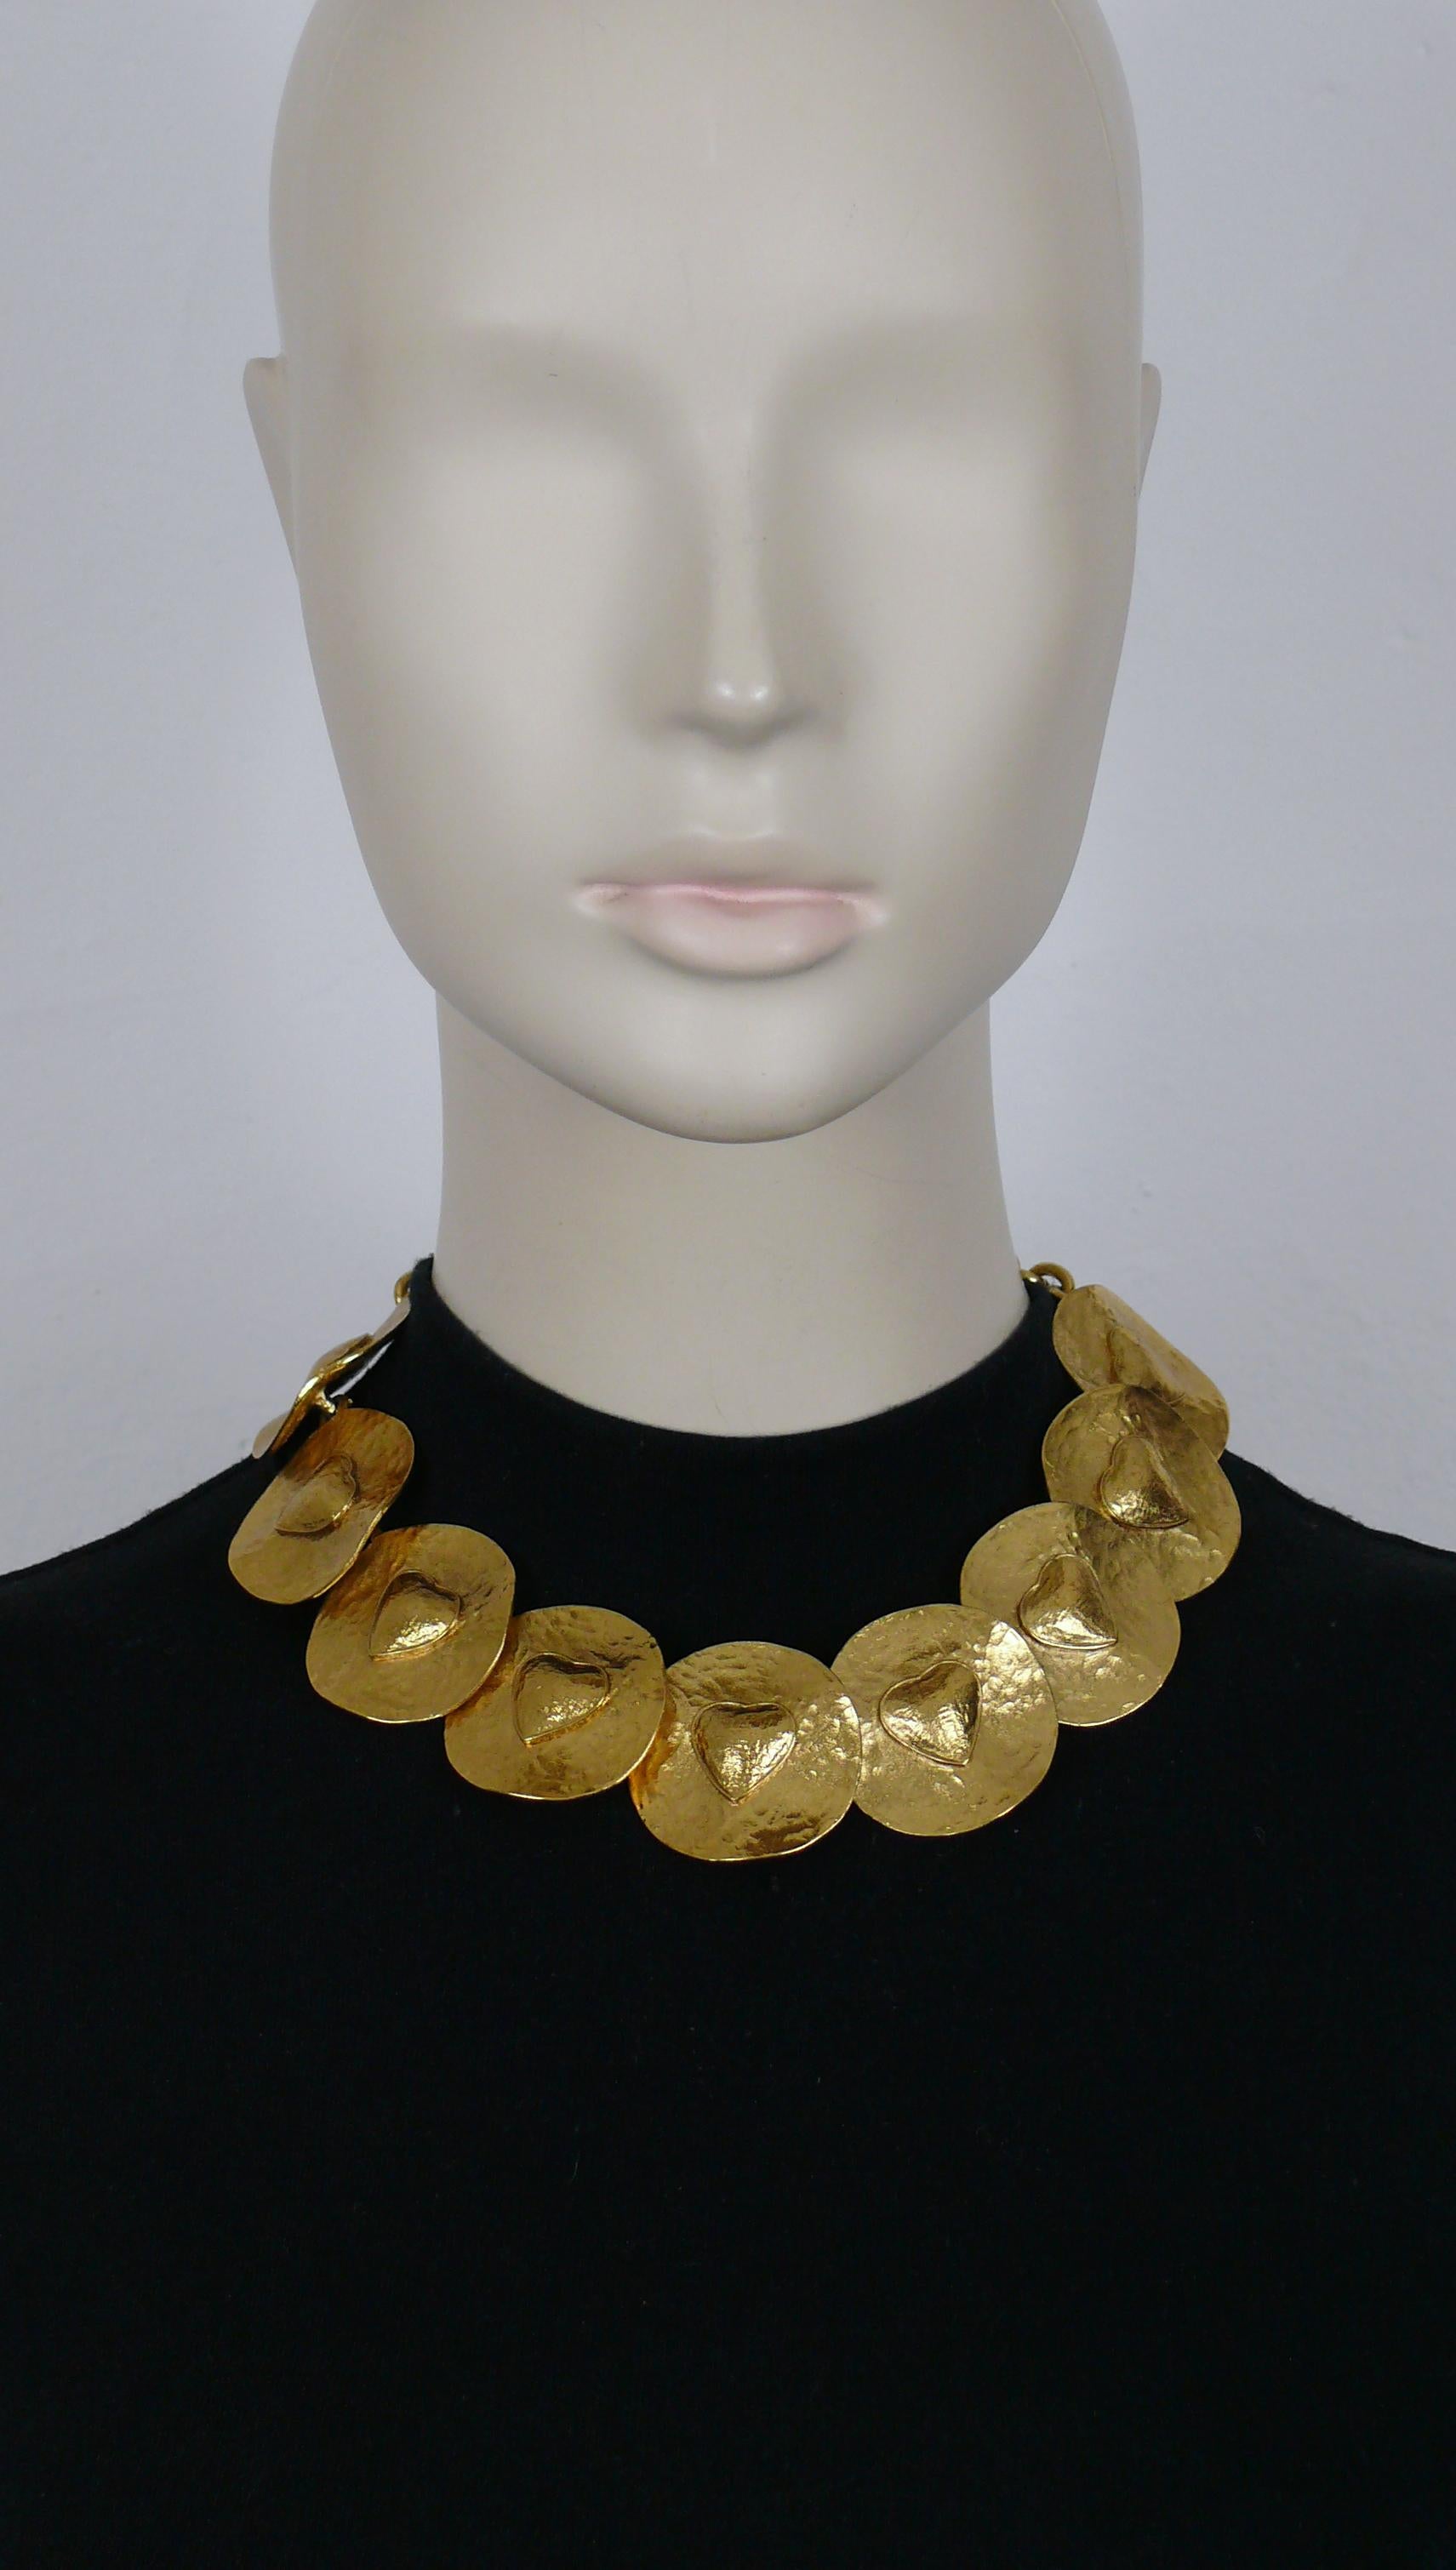 YVES SAINT LAURENT vintage gold tone necklace featuring textured creased discs, each with heart at the center.

Adjustable T-bar and toggles closure.

Embossed with the cursive YVES SAINT LAURENT signature on the heart toggles.
Embossed YSL Made in